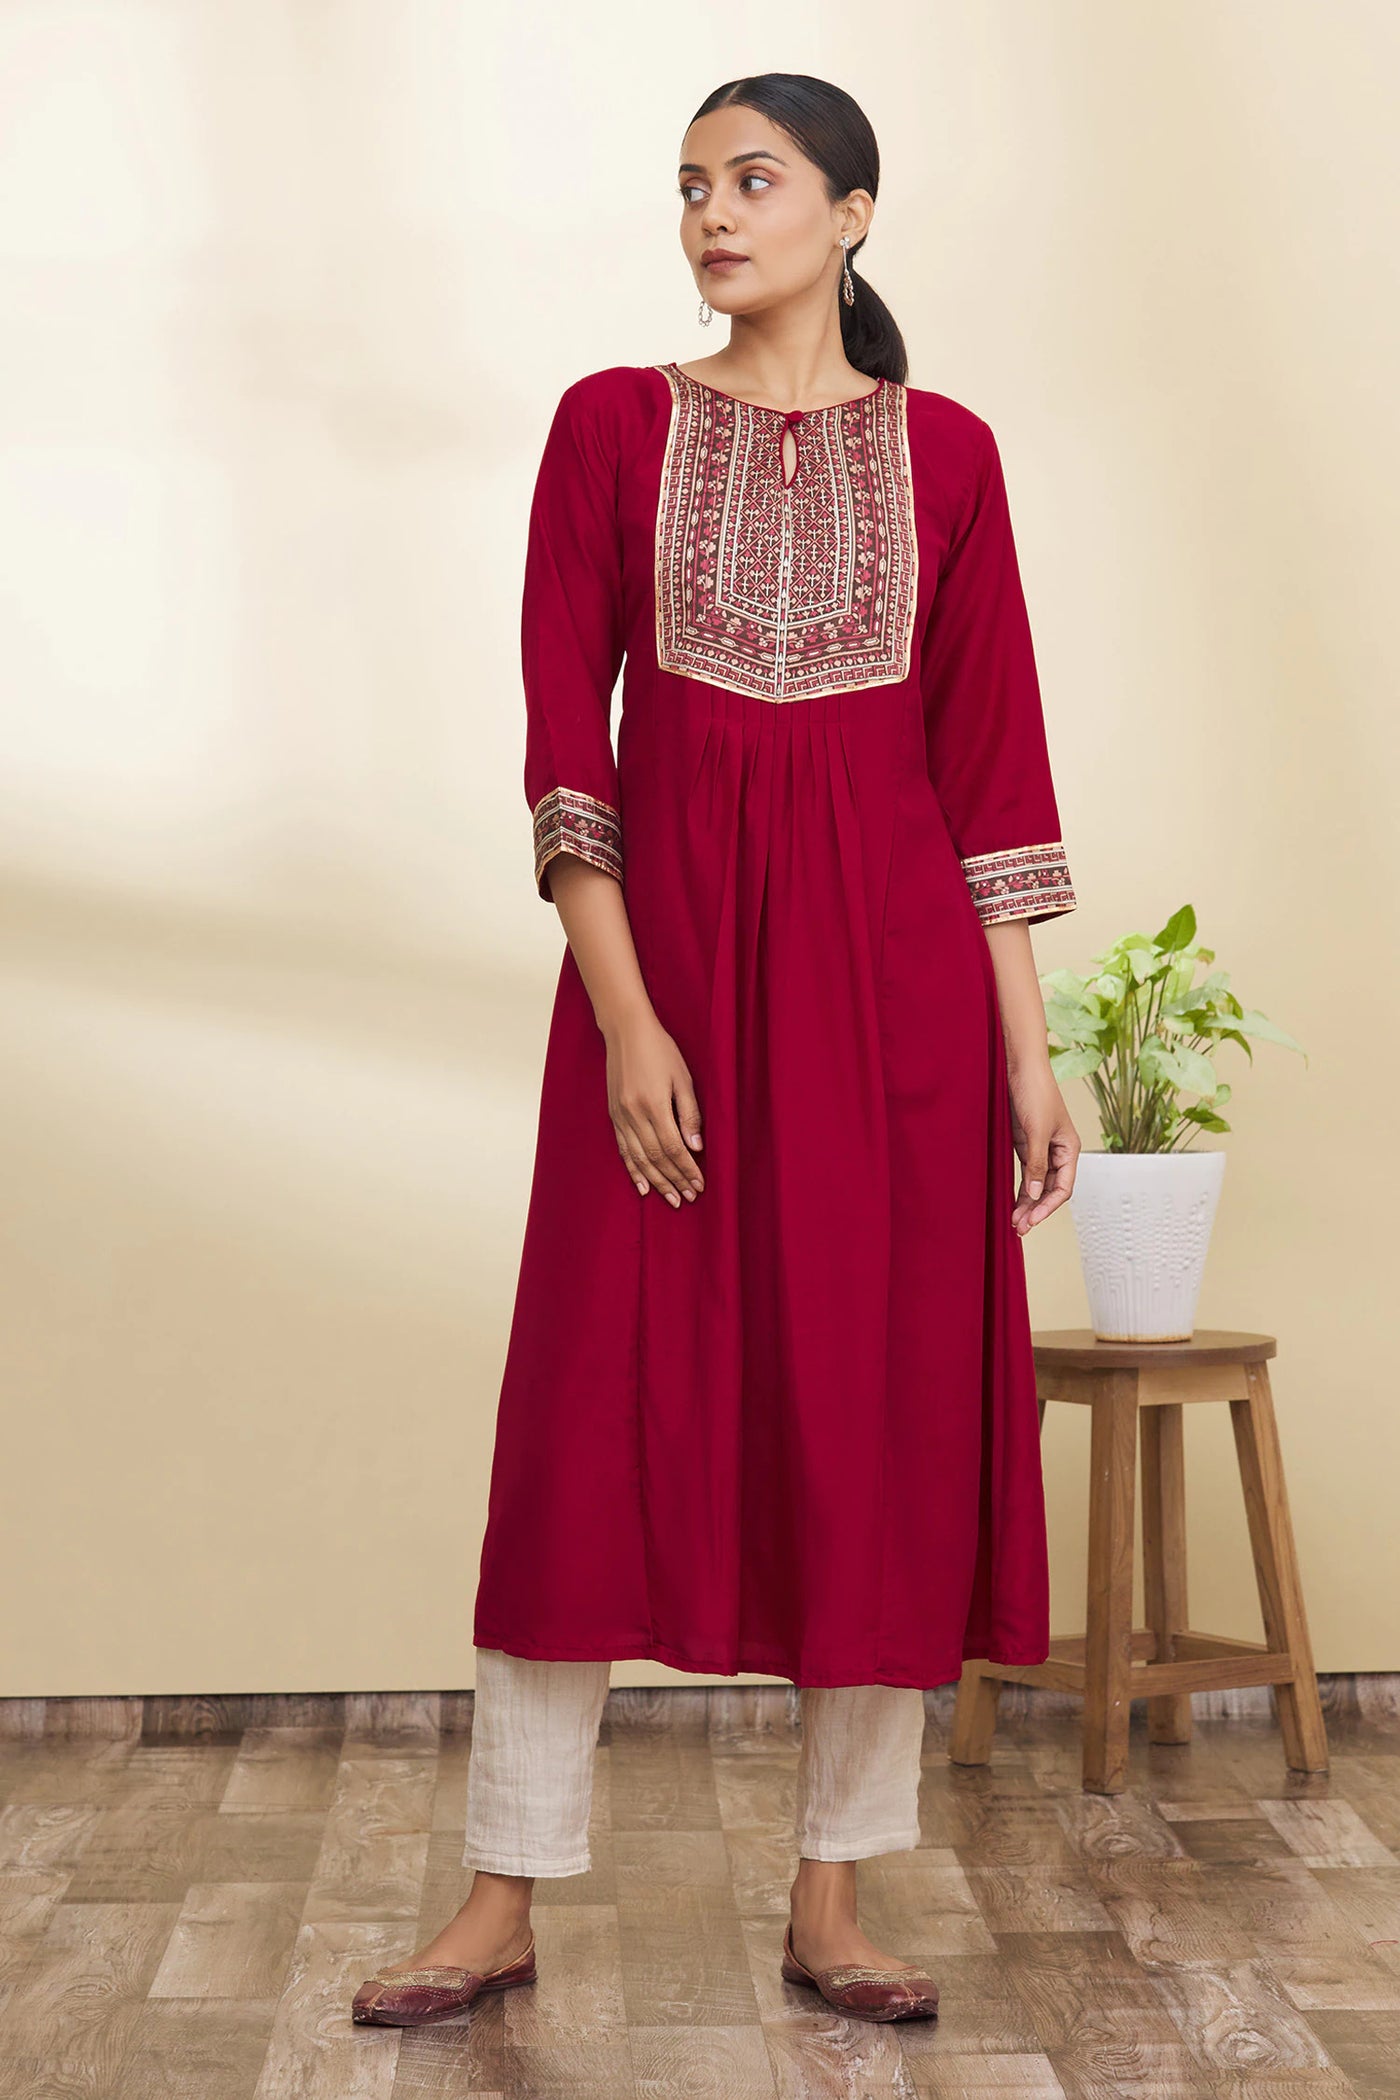 Maroon Floral Design Kurta - Indian Clothing in Denver, CO, Aurora, CO, Boulder, CO, Fort Collins, CO, Colorado Springs, CO, Parker, CO, Highlands Ranch, CO, Cherry Creek, CO, Centennial, CO, and Longmont, CO. Nationwide shipping USA - India Fashion X